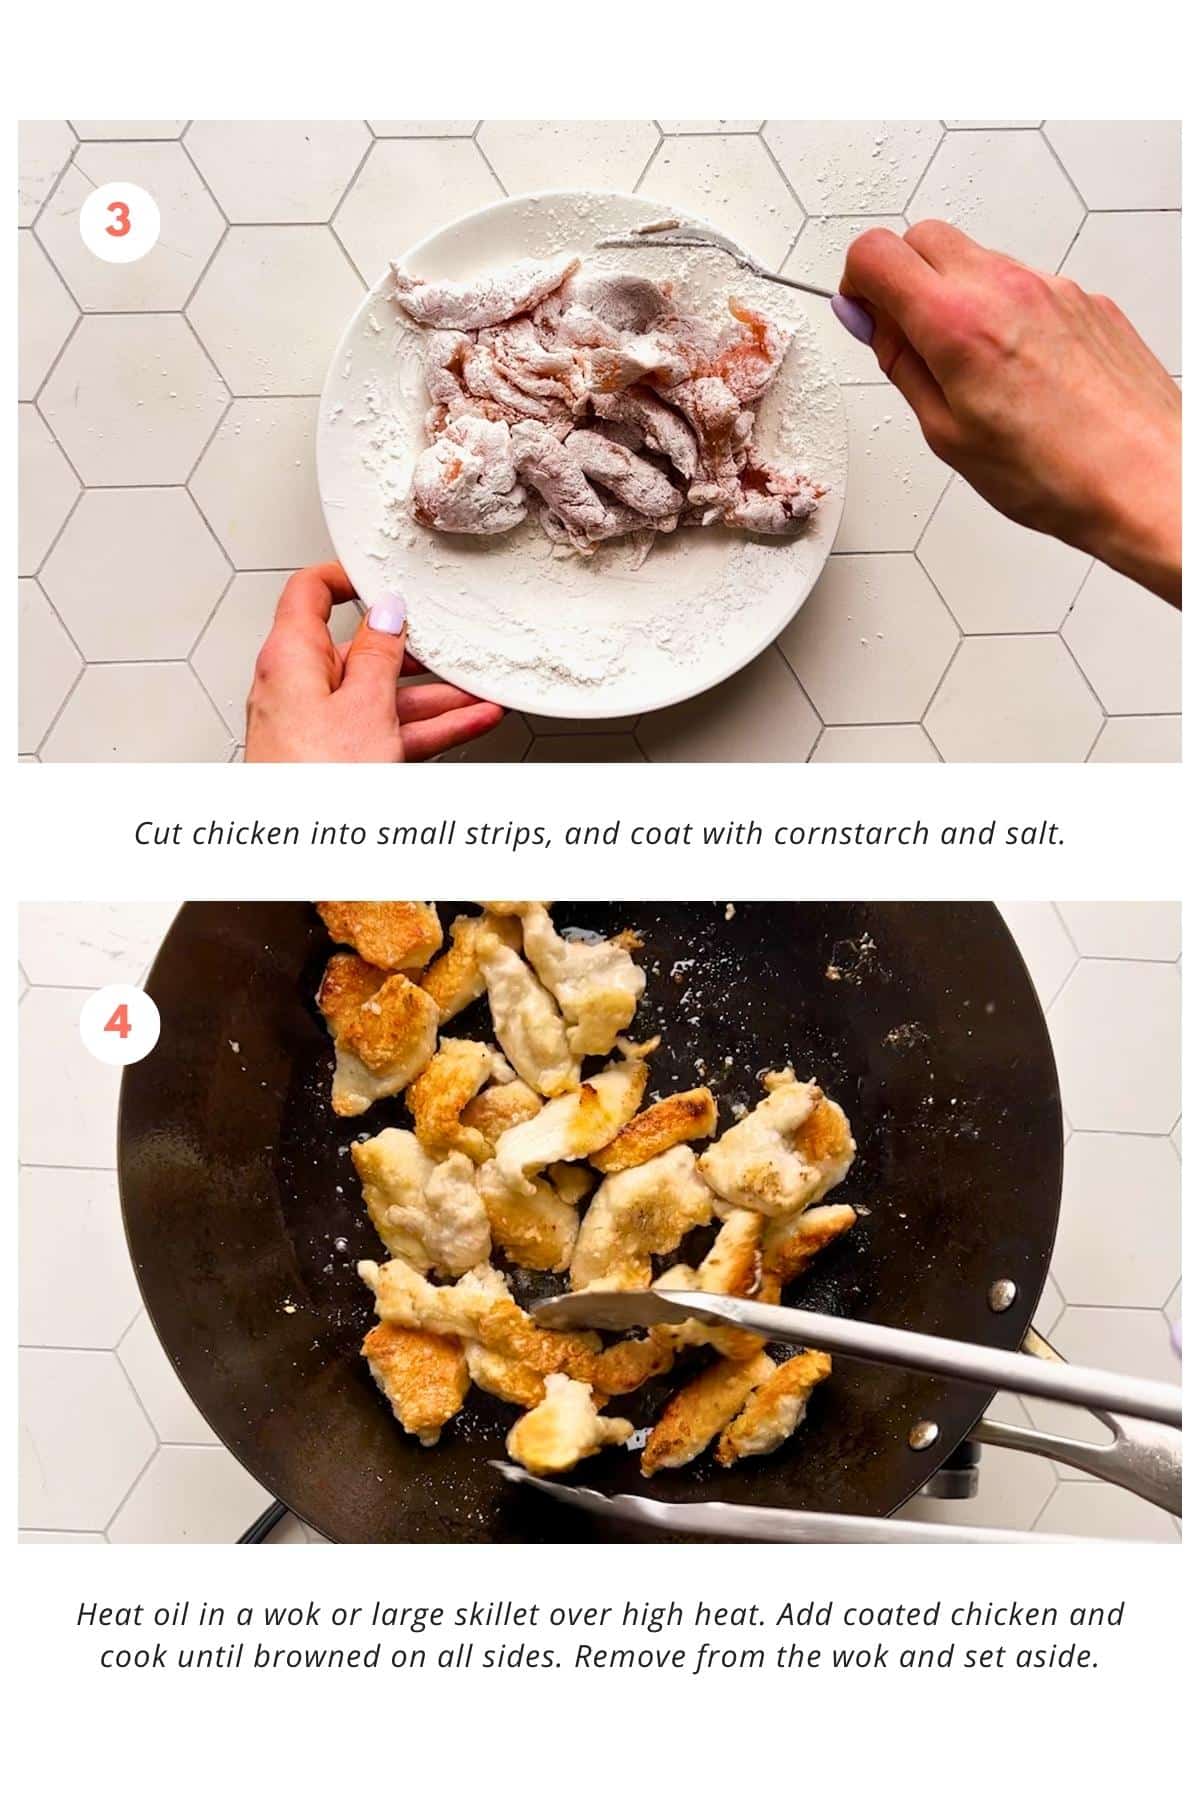 Chicken is cut into small strips and coated with cornstarch and salt. Oil is heated in a wok or large skillet over high heat. Coated chicken is added and cooked until browned on all sides. Chicken is then removed from the wok and set aside.